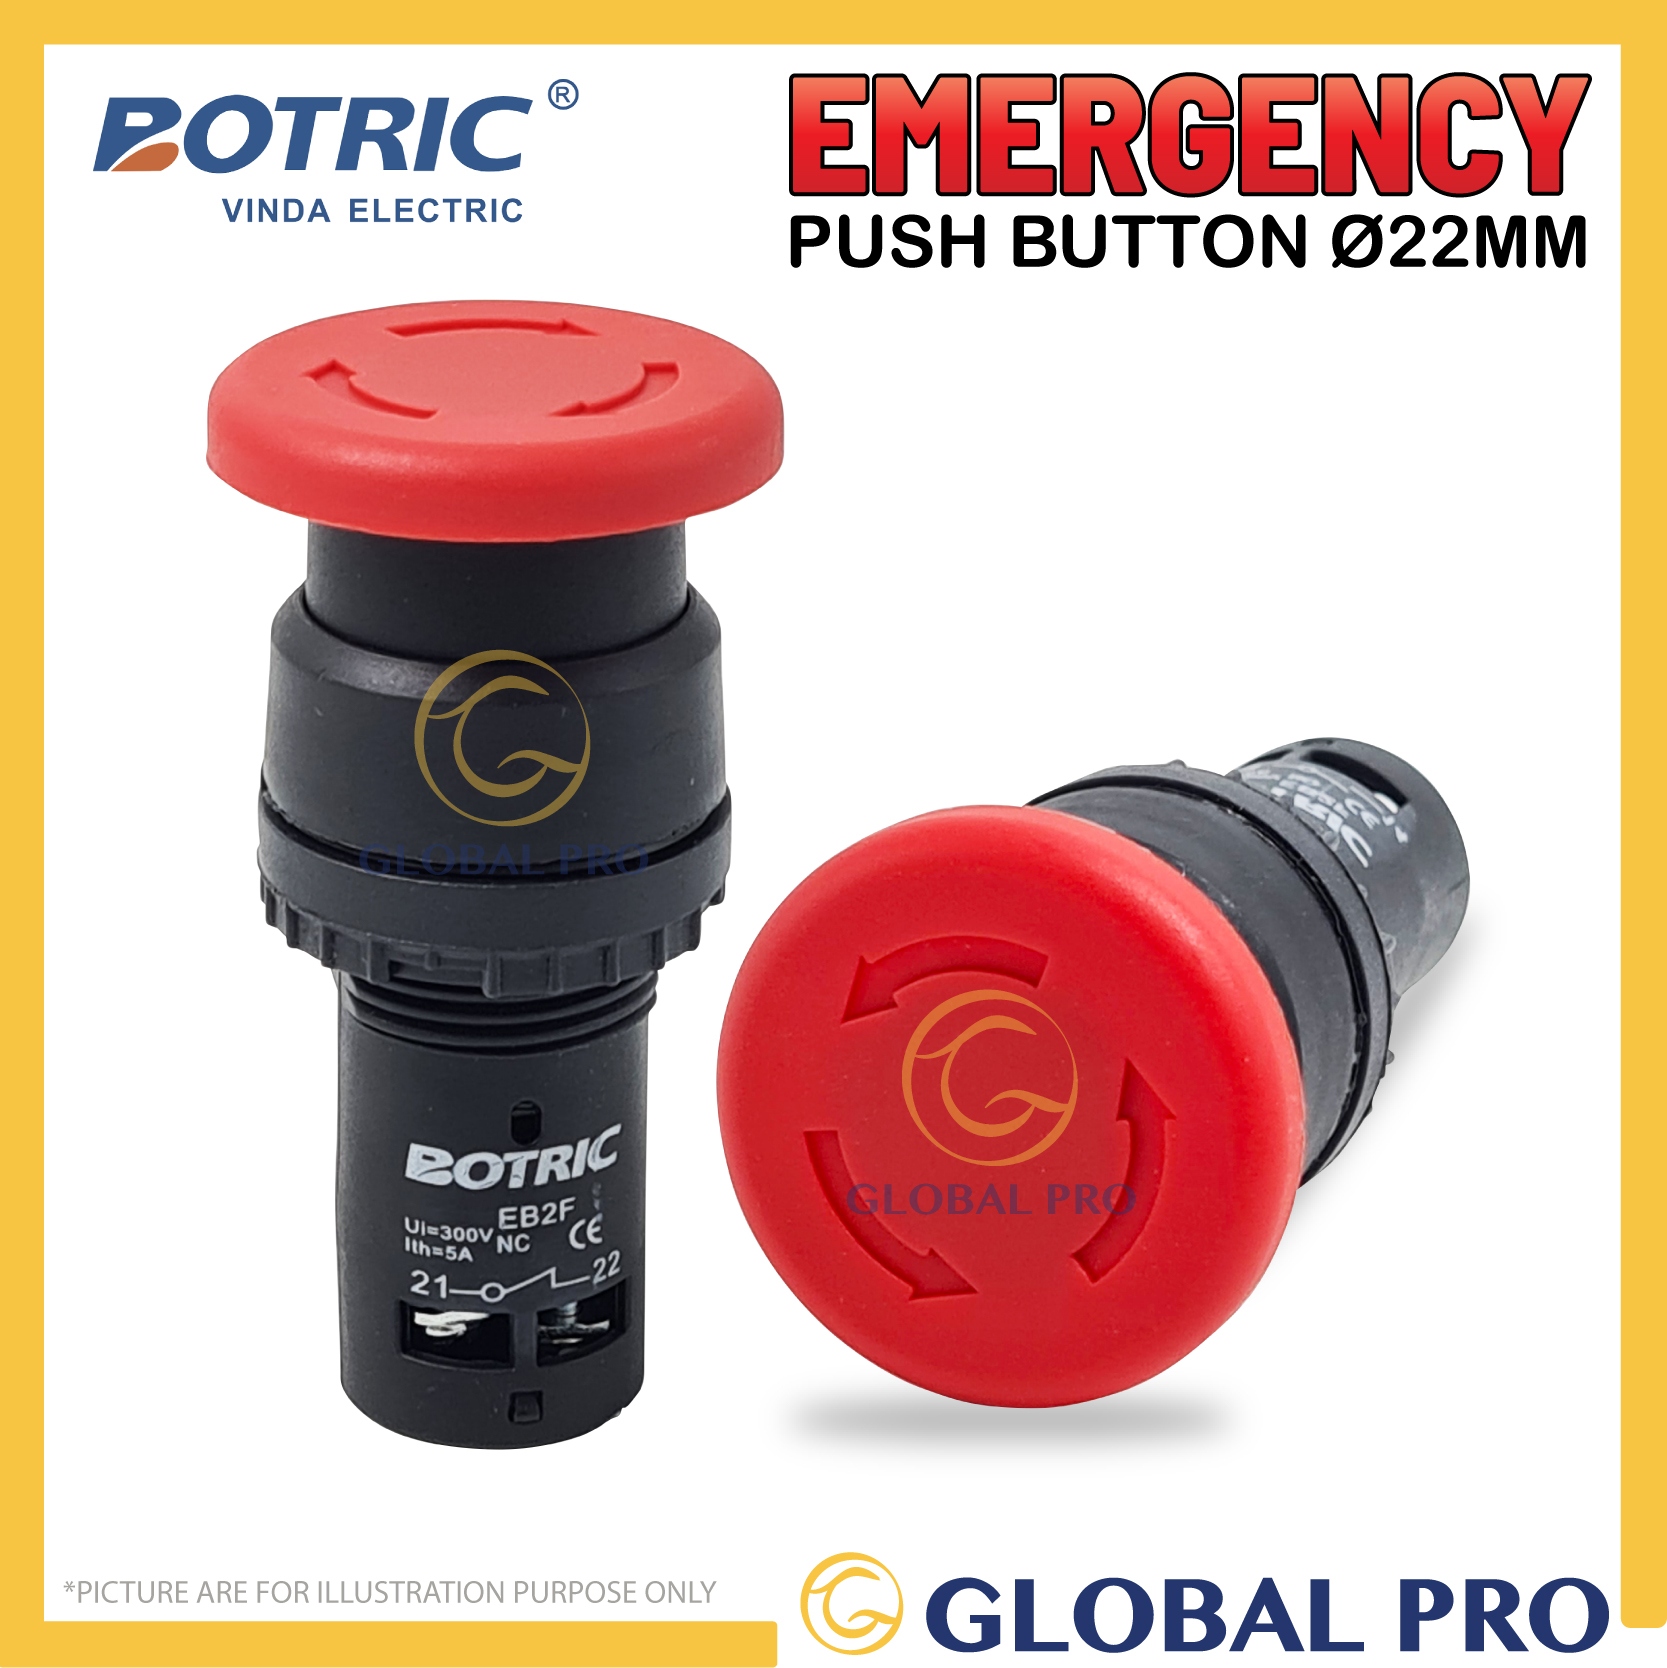 BOTRIC Emergency Push Button with Reset/Lock E-Stop Diameter 22mm NO NC EB27